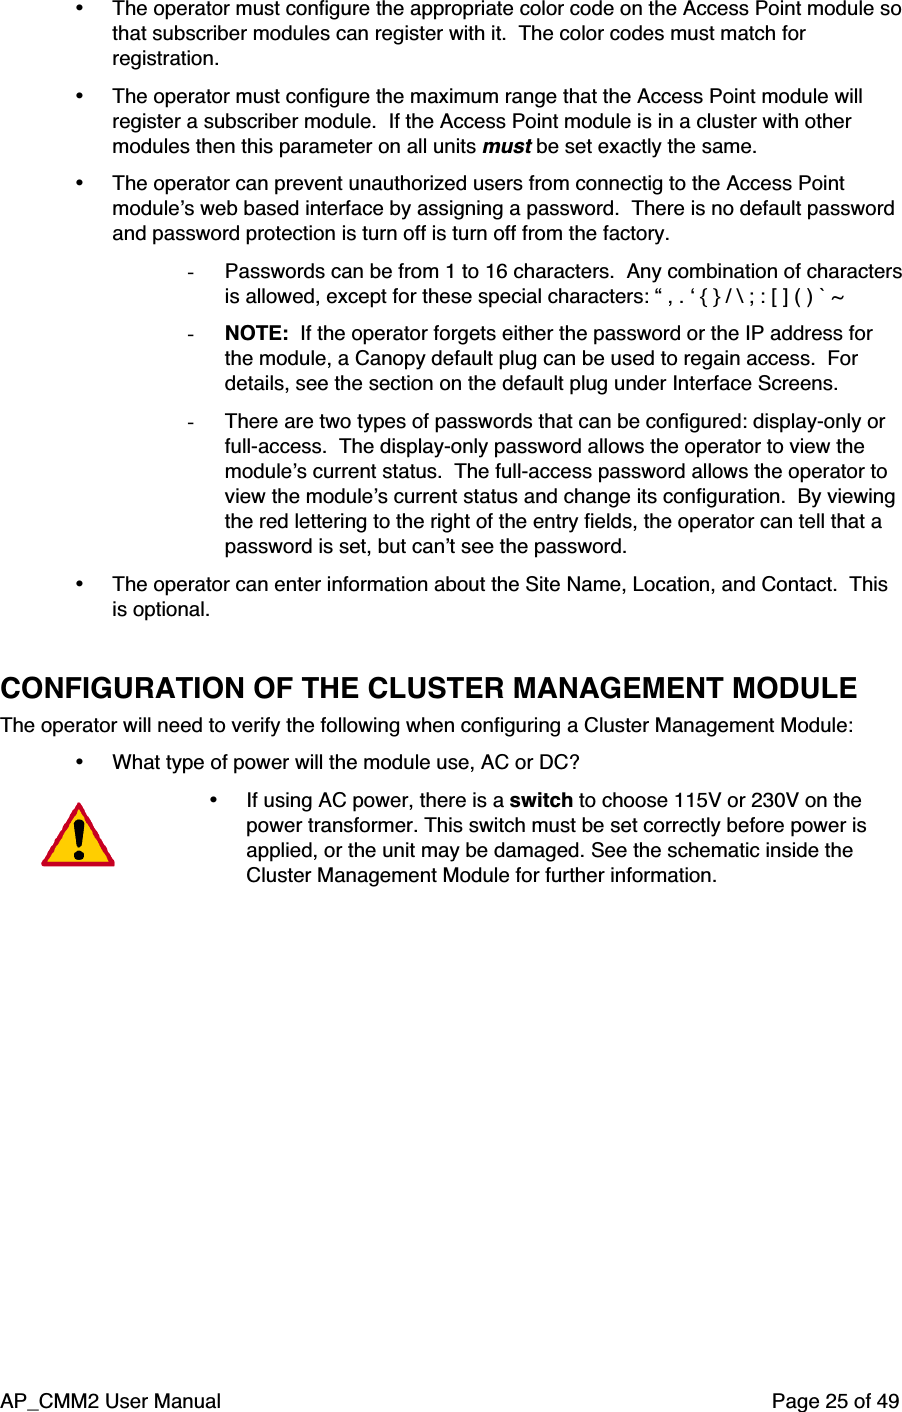 AP_CMM2 User Manual Page 25 of 49• The operator must configure the appropriate color code on the Access Point module sothat subscriber modules can register with it.  The color codes must match forregistration.• The operator must configure the maximum range that the Access Point module willregister a subscriber module.  If the Access Point module is in a cluster with othermodules then this parameter on all units must be set exactly the same.• The operator can prevent unauthorized users from connectig to the Access Pointmodule’s web based interface by assigning a password.  There is no default passwordand password protection is turn off is turn off from the factory.- Passwords can be from 1 to 16 characters.  Any combination of charactersis allowed, except for these special characters: “ , . ‘ { } / \ ; : [ ] ( ) ` ~- NOTE:  If the operator forgets either the password or the IP address forthe module, a Canopy default plug can be used to regain access.  Fordetails, see the section on the default plug under Interface Screens.- There are two types of passwords that can be configured: display-only orfull-access.  The display-only password allows the operator to view themodule’s current status.  The full-access password allows the operator toview the module’s current status and change its configuration.  By viewingthe red lettering to the right of the entry fields, the operator can tell that apassword is set, but can’t see the password.• The operator can enter information about the Site Name, Location, and Contact.  Thisis optional.CONFIGURATION OF THE CLUSTER MANAGEMENT MODULEThe operator will need to verify the following when configuring a Cluster Management Module:• What type of power will the module use, AC or DC?• If using AC power, there is a switch to choose 115V or 230V on thepower transformer. This switch must be set correctly before power isapplied, or the unit may be damaged. See the schematic inside theCluster Management Module for further information.